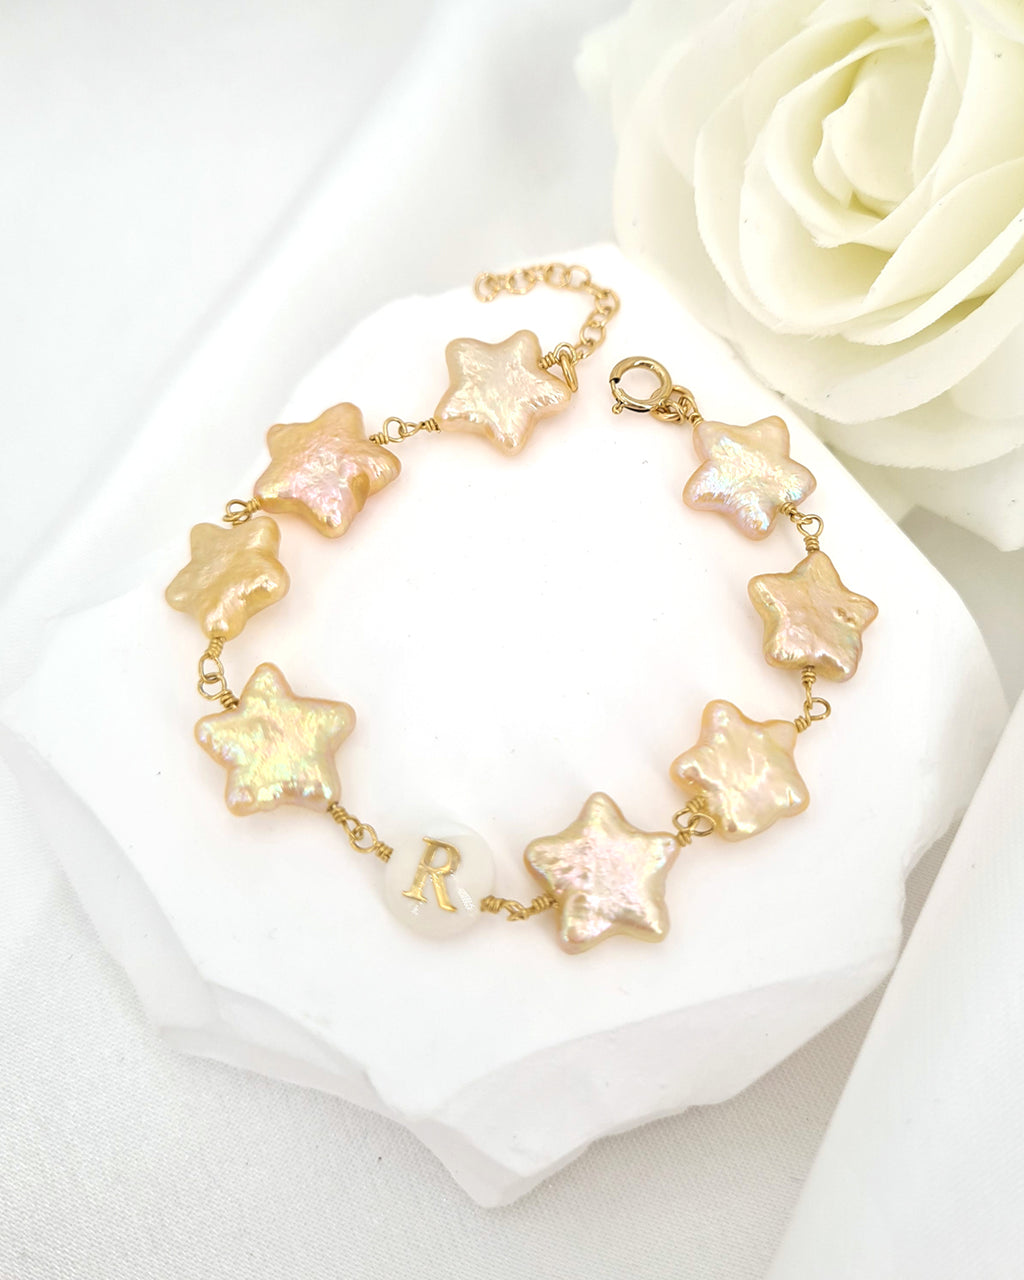 Personalised Letter Bracelet with Star Pearls - 14k gold filled